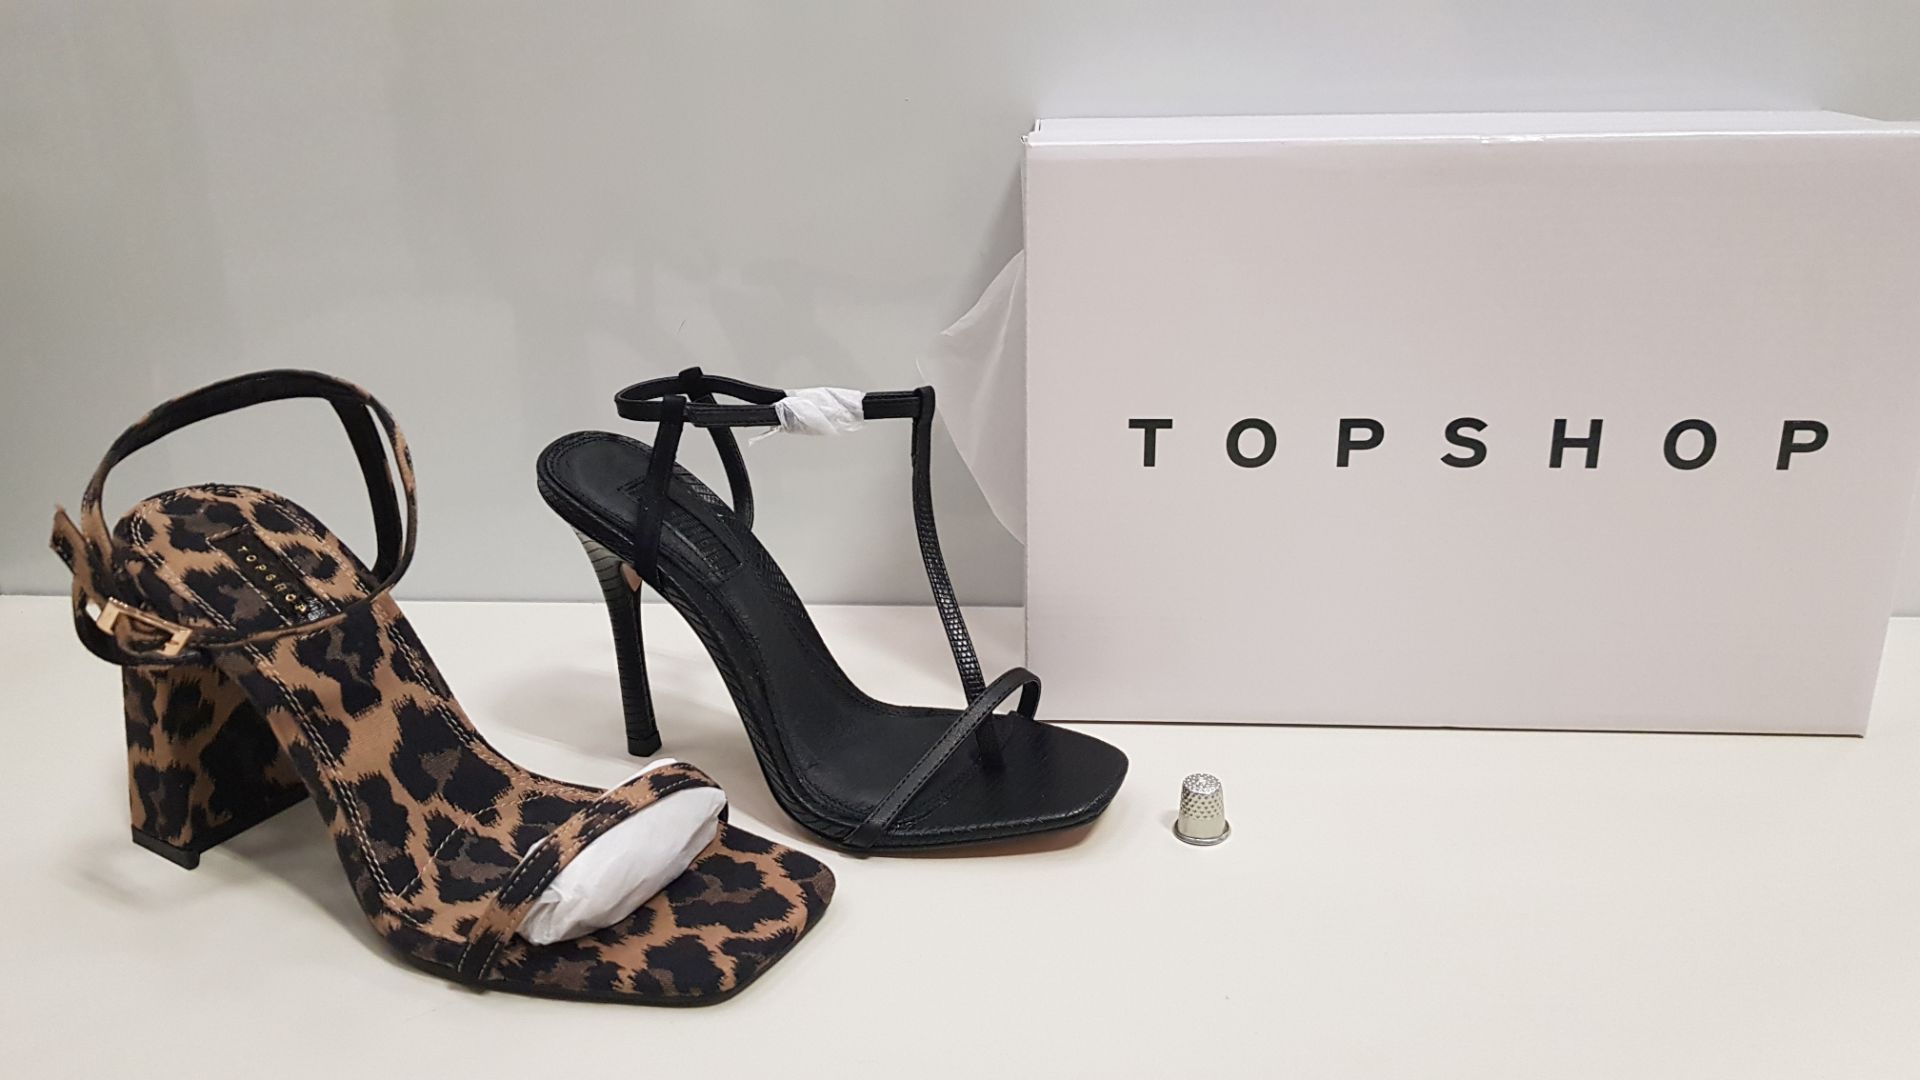 15 X BRAND NEW TOPSHOP SHOES - 13 X BRAND NEW TOPSHOP ROCCO TRUE LEOPARD UK SIZE 7 AND 5 SHOES AND 2